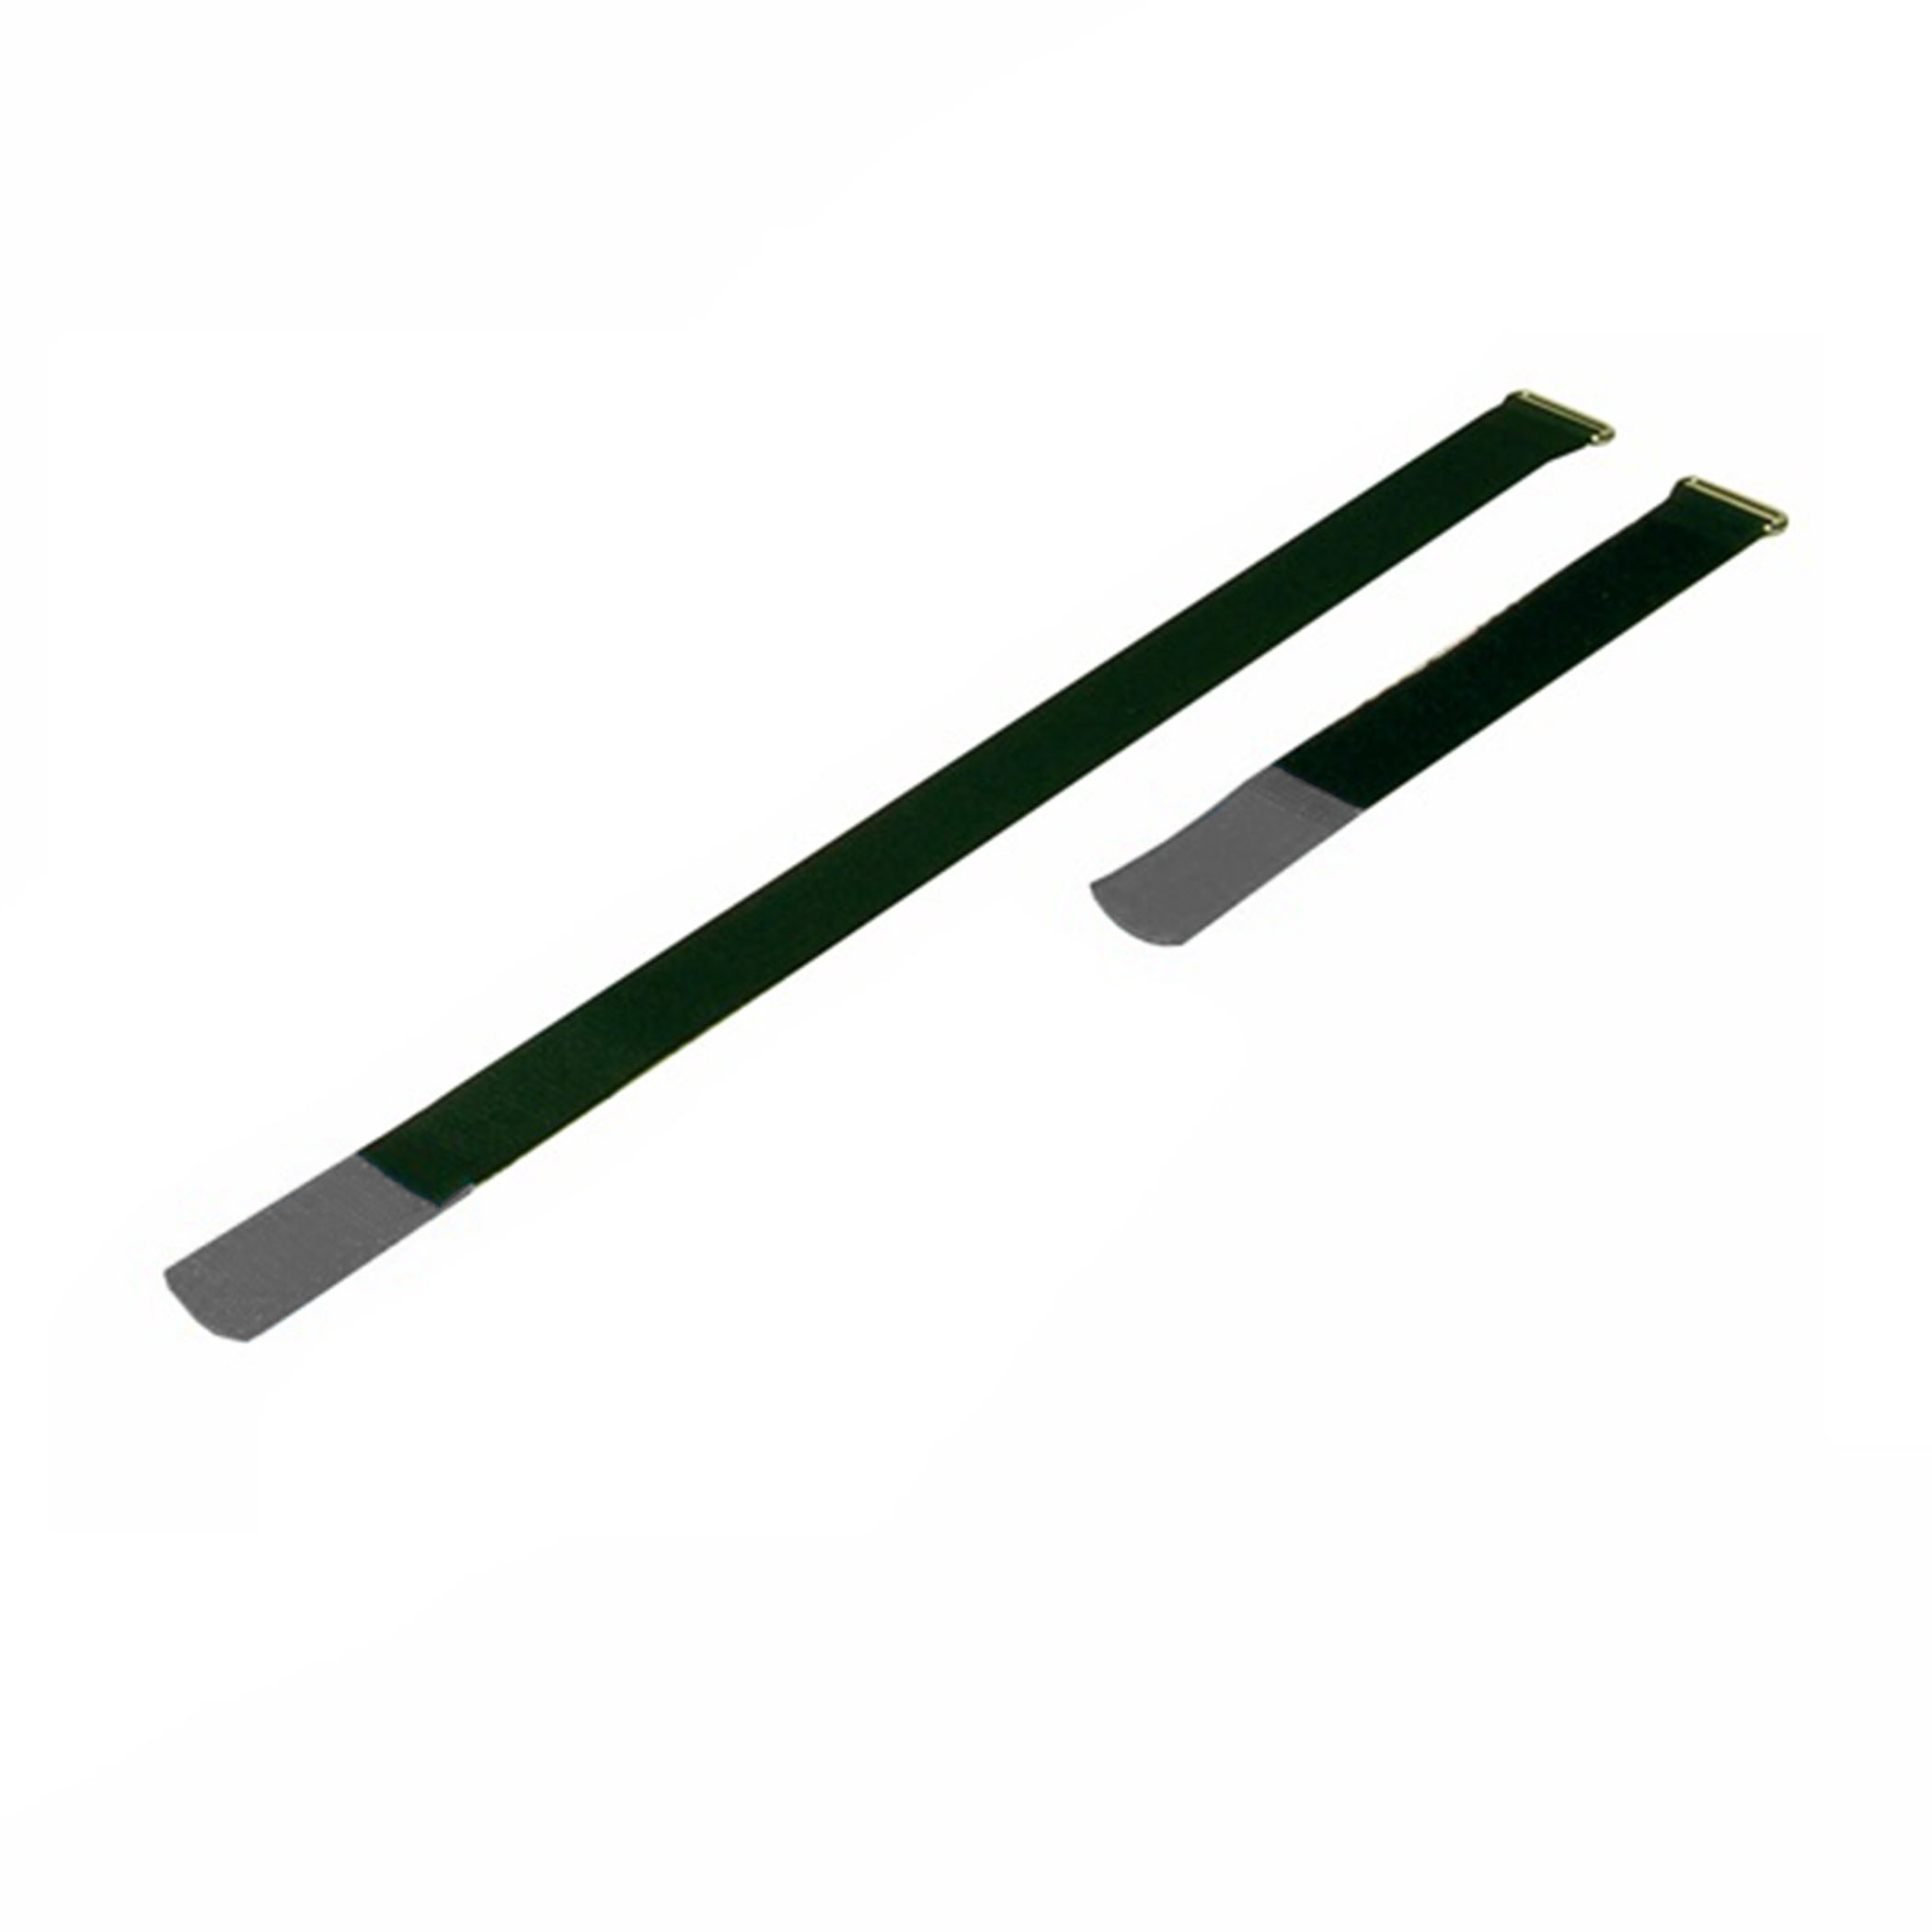 Cable Tie 220x25mm with Hook Gray, (10 pieces) - a2522-520h